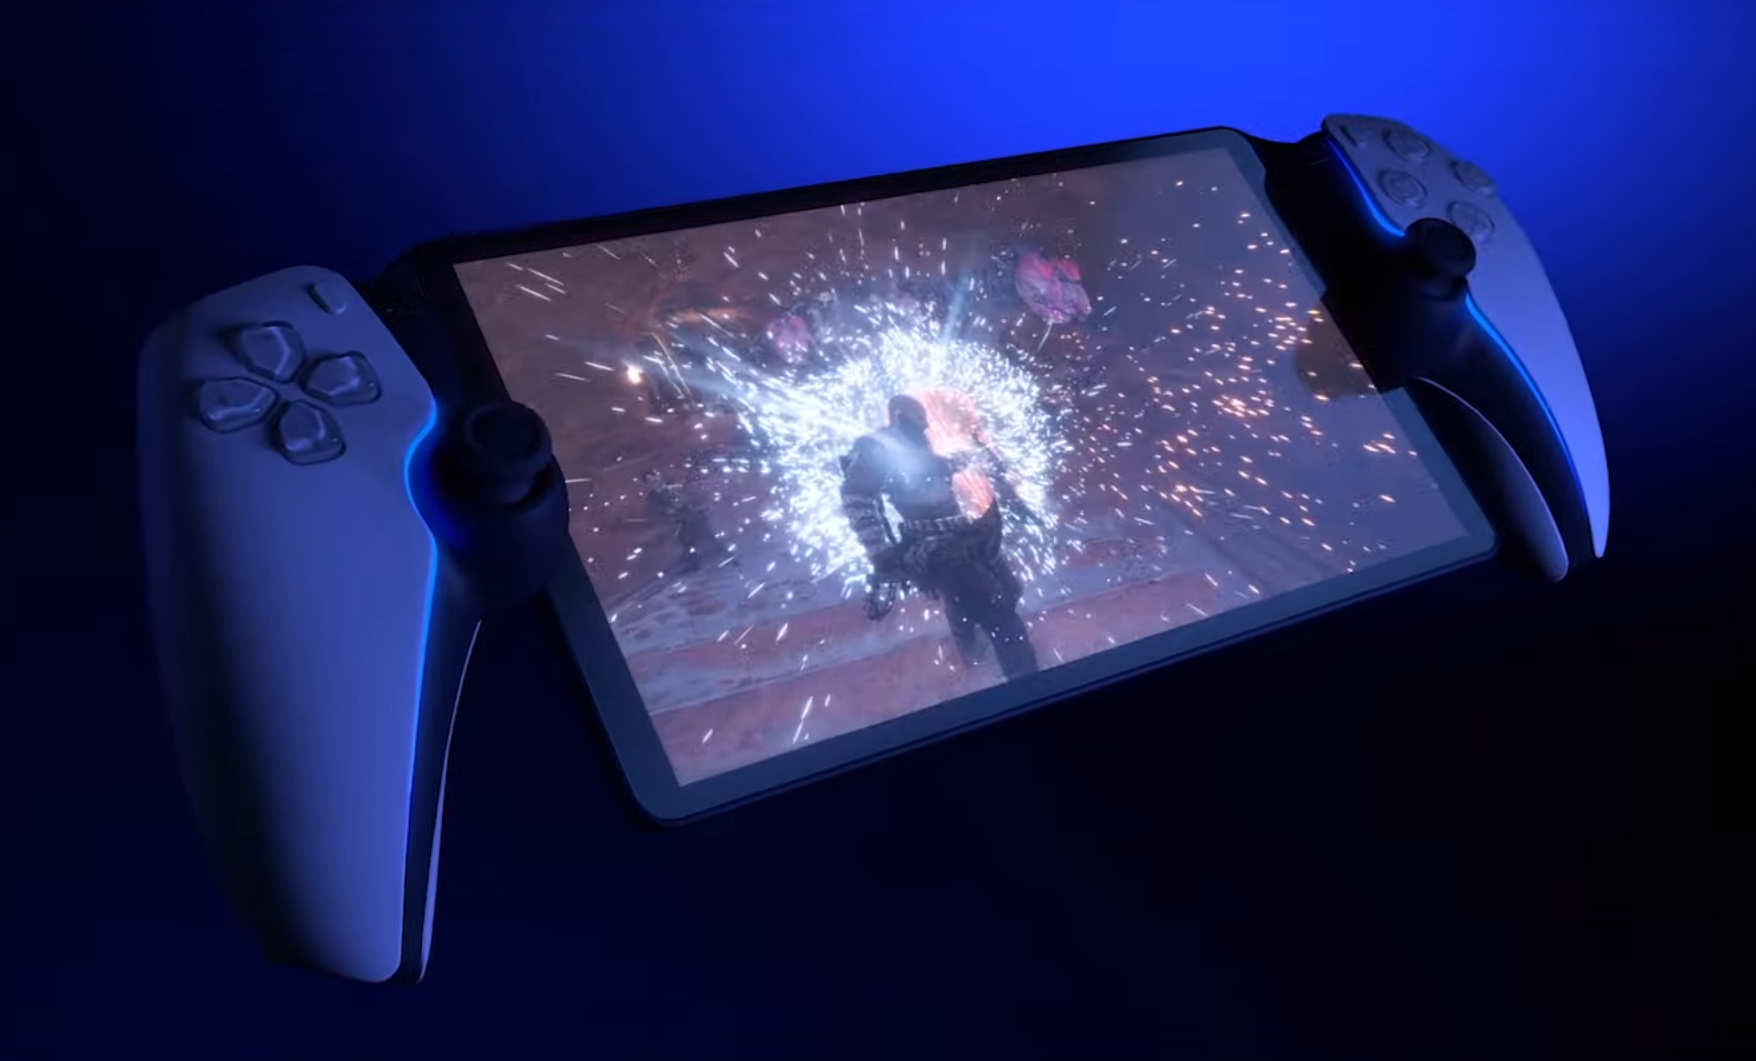 It’s official: the successor to the PSP / PS Vita, Sony’s new portable console, is already in the works